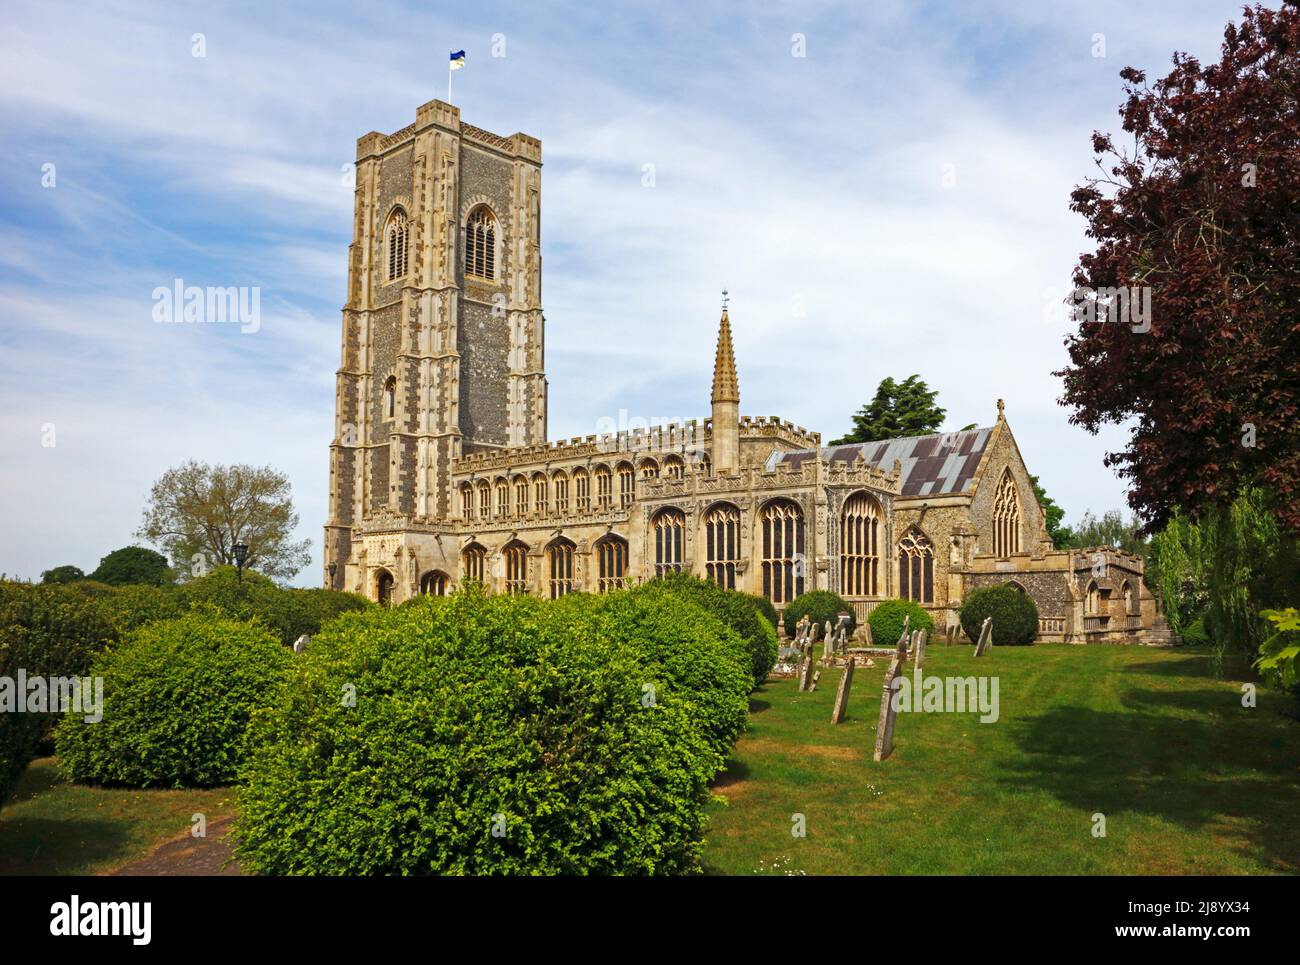 A view of the parish Church of St Peter and St Paul in the village of Lavenham, Suffolk, England, United Kingdom. Stock Photo